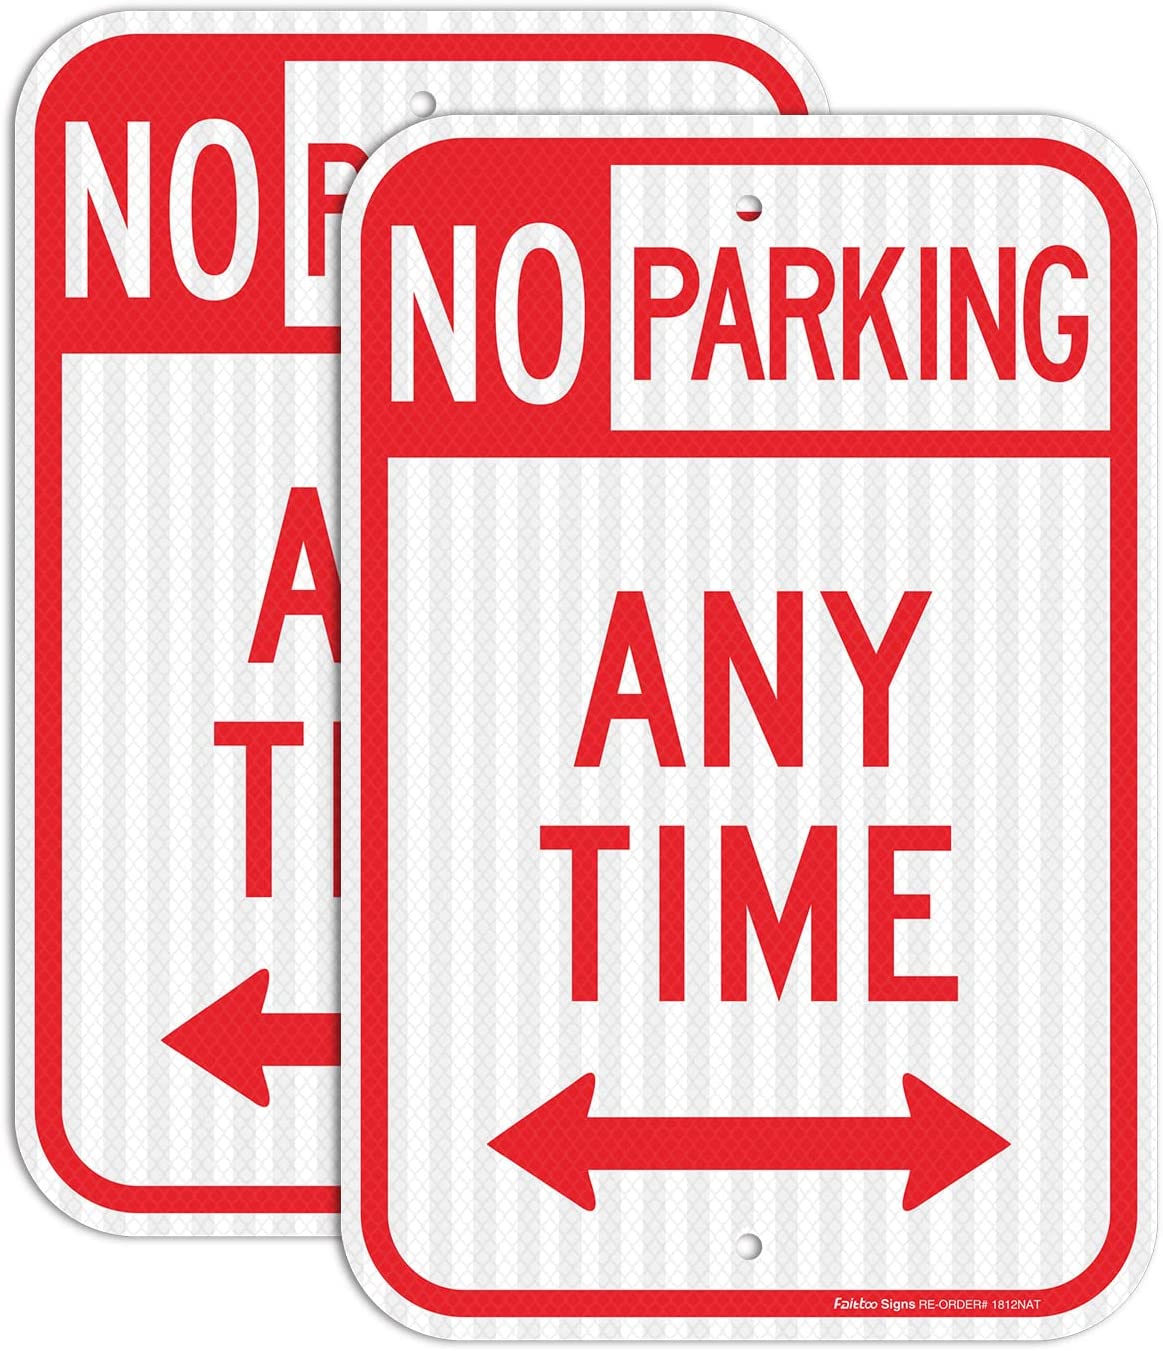 No Parking Anytime Sign with Arrows, No Parking Sign, 18 x 12 Inches Engineer Grade Reflective Sheeting Rust Free Aluminum, Weather Resistant, Waterproof, Durable Ink, Easy to Mount